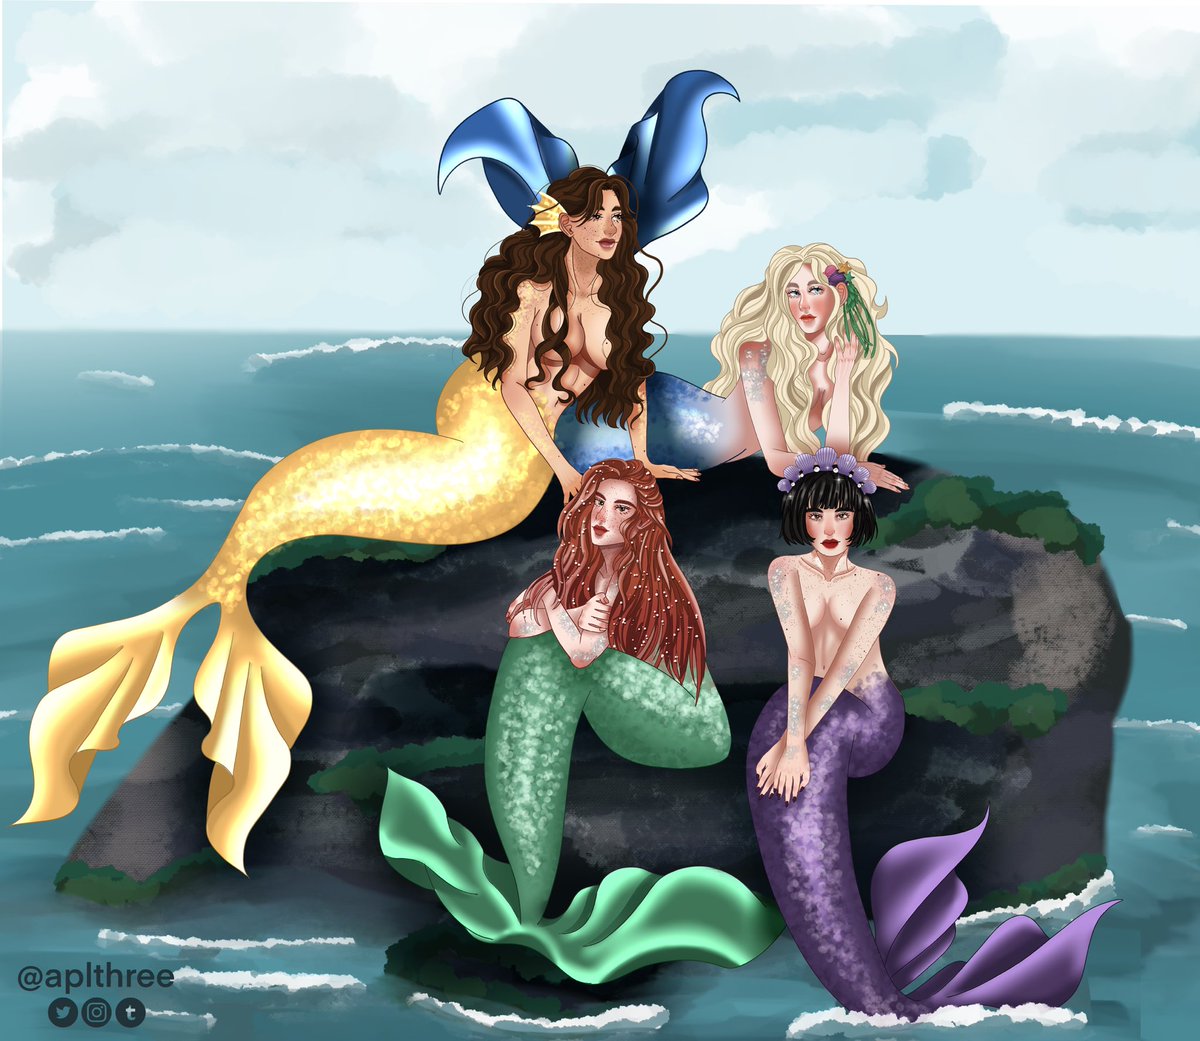 Waiting for some sailors to love or drown. 💛💙💚💜

#ginnyweasley #hermionegranger #lunalovegood #pansyparkinson #mermay